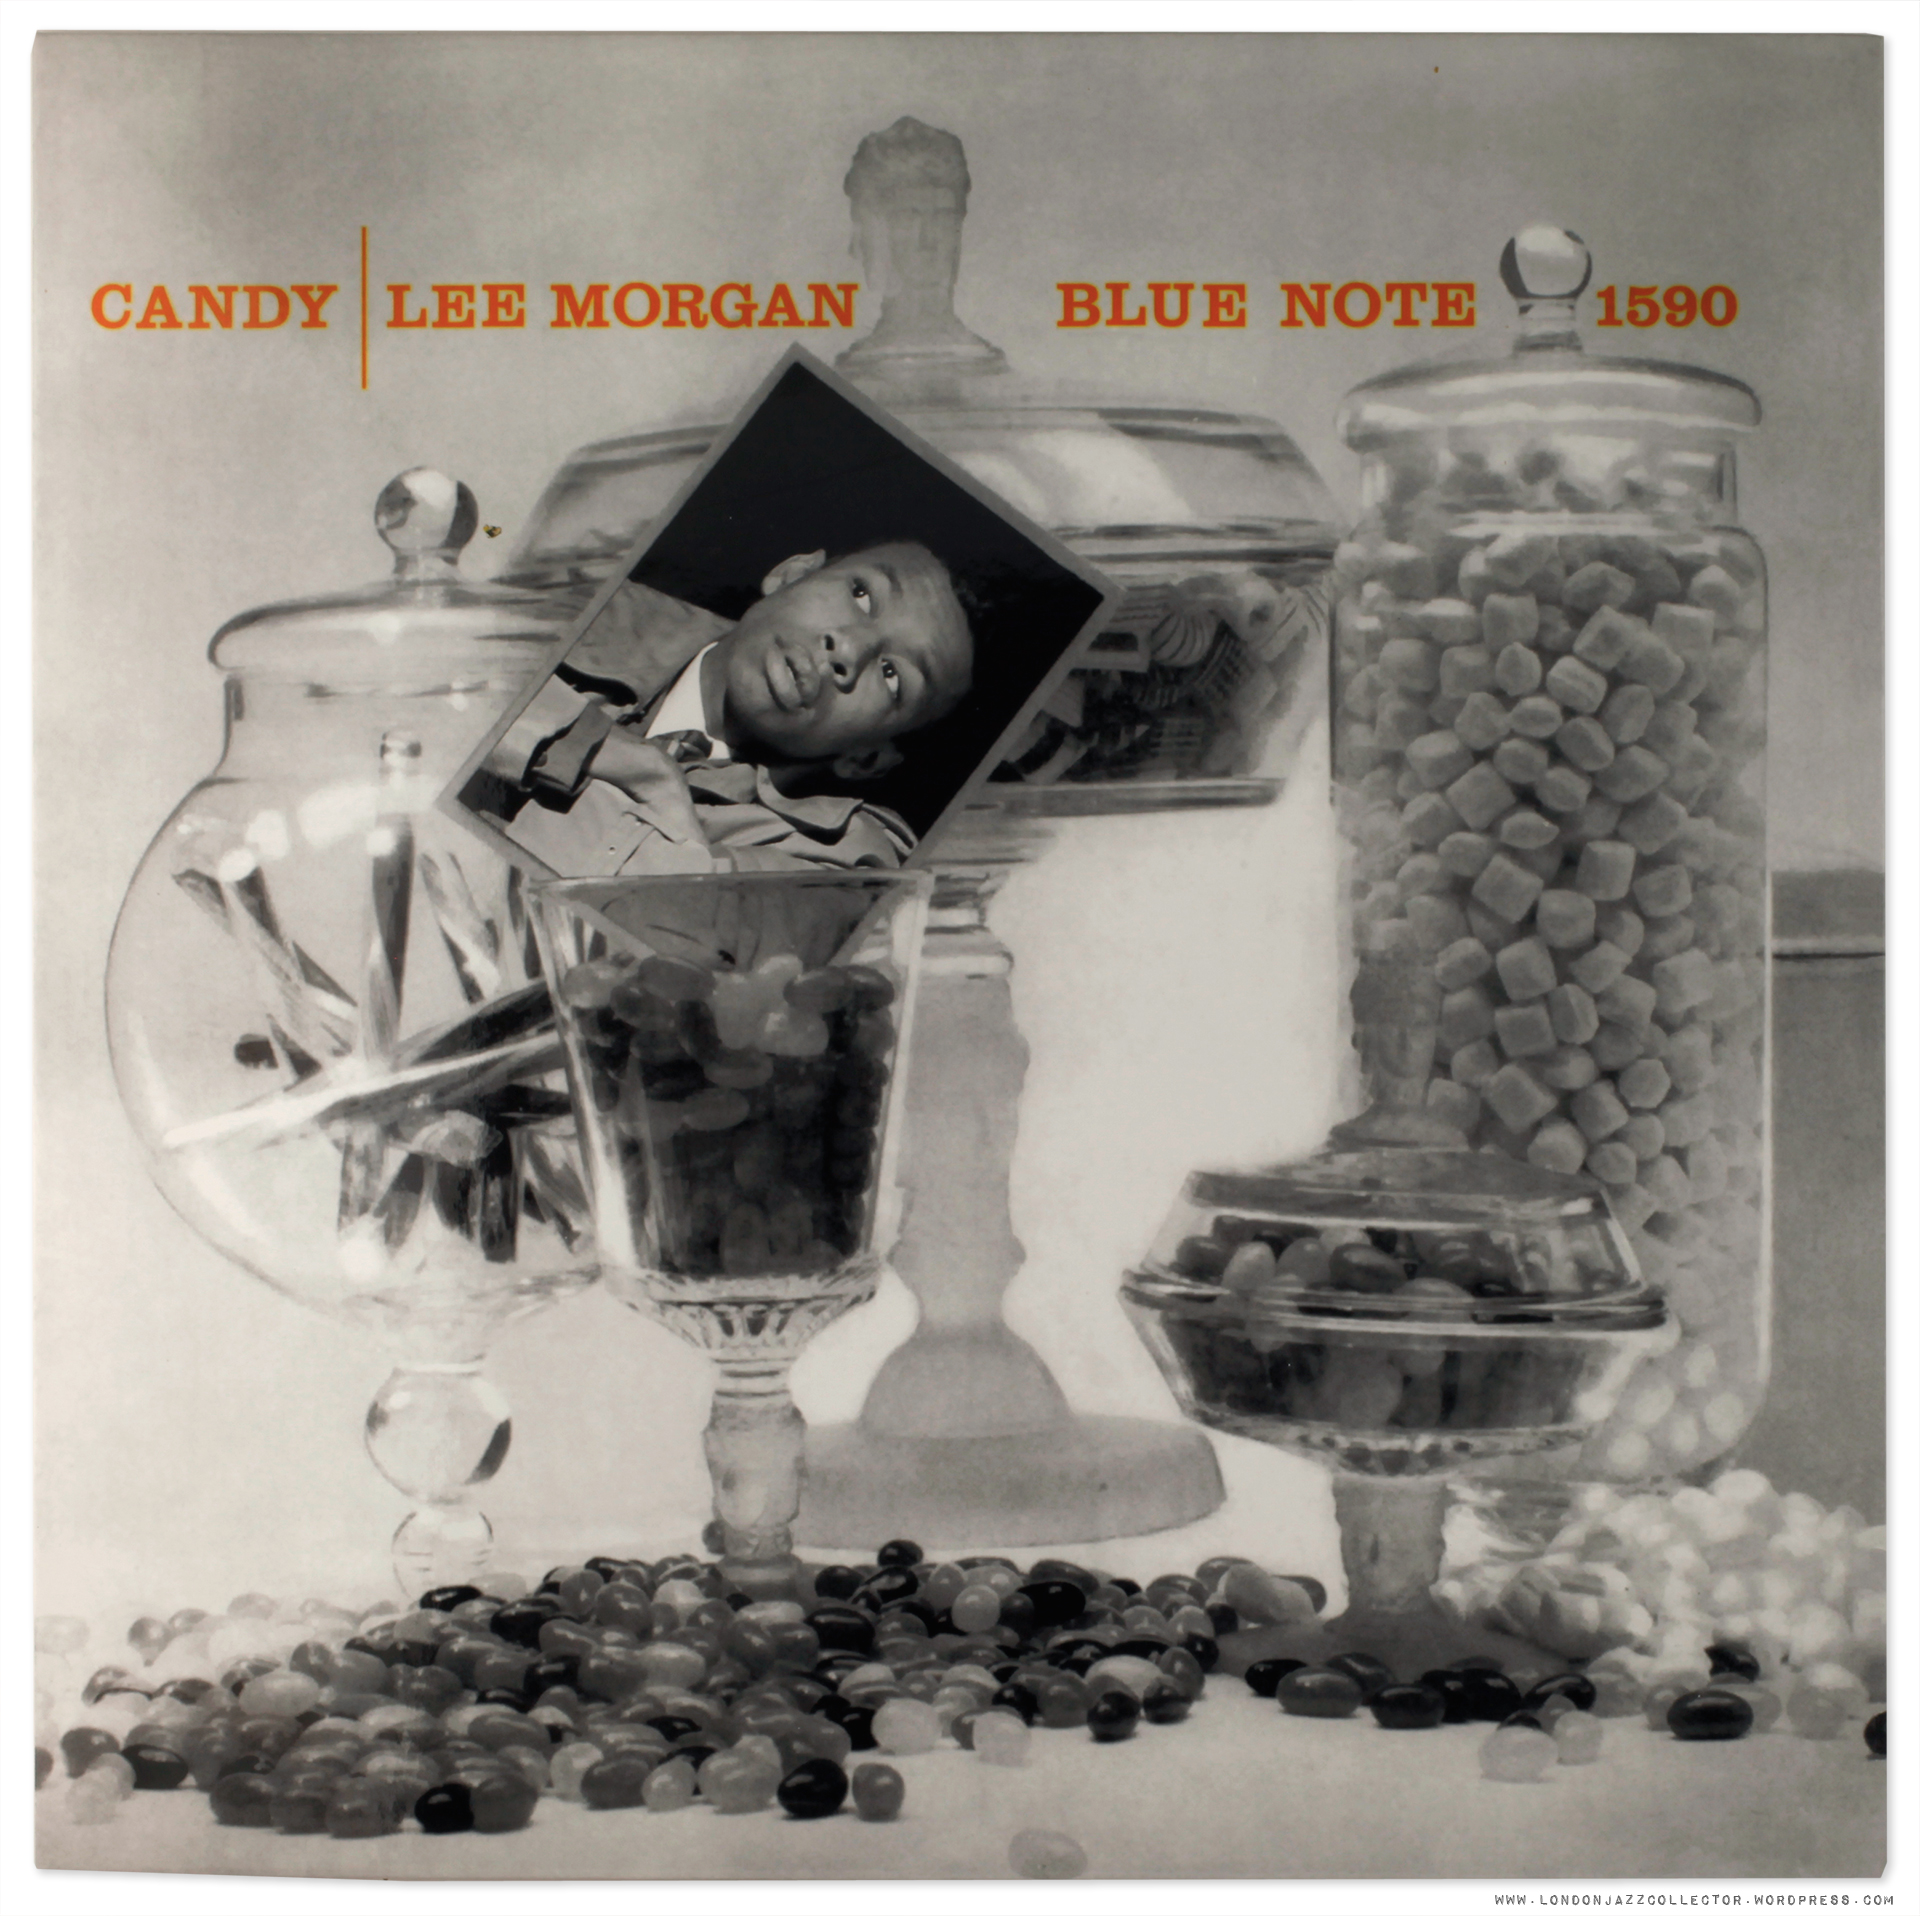 Lee Morgan: Candy (1958) Blue Note/ MM33 | LondonJazzCollector